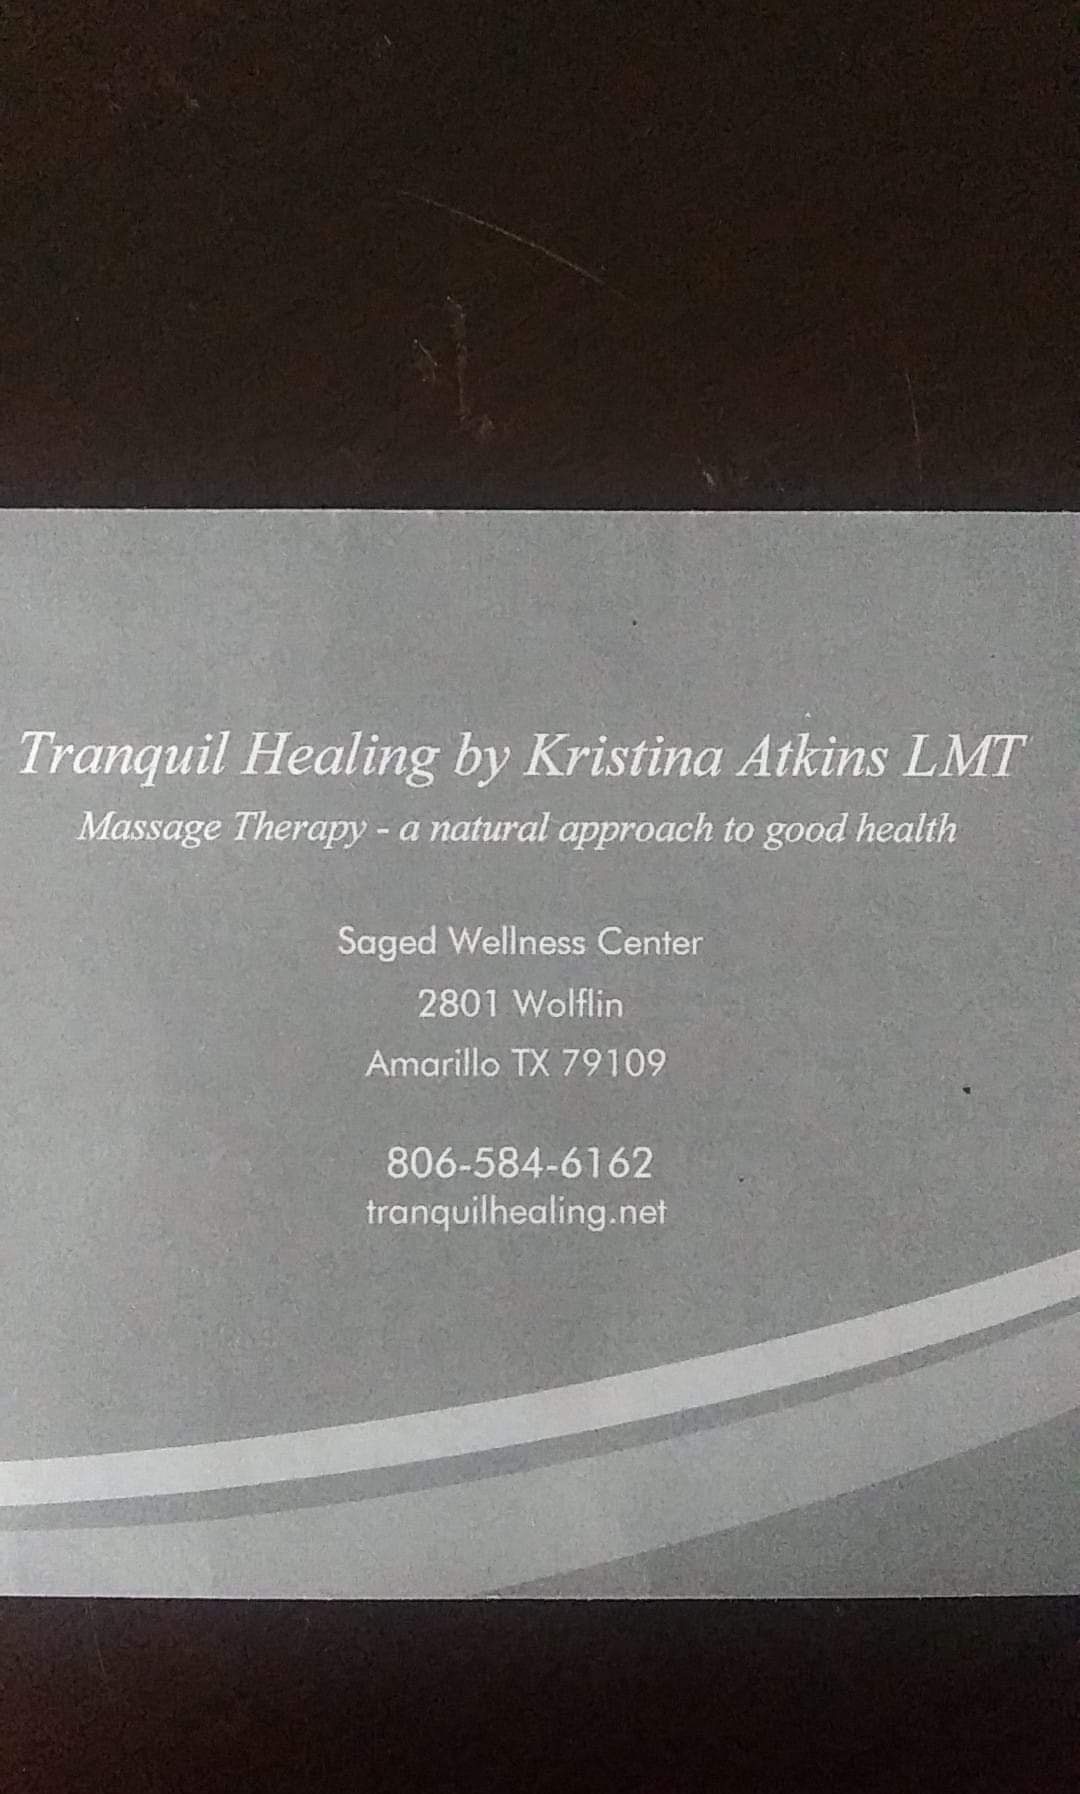 Tranquil Healing by Kristina Atkins LMT